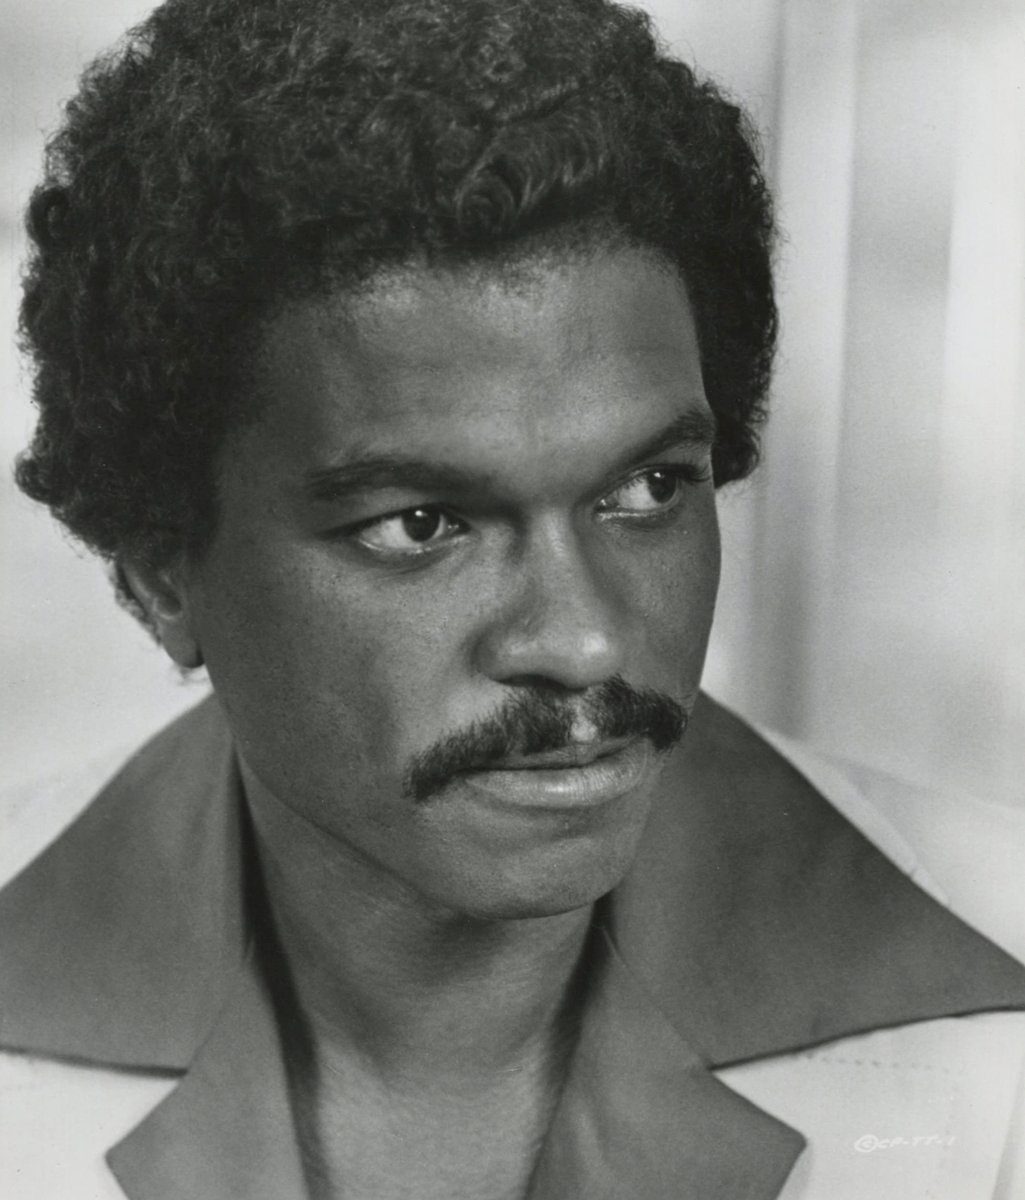 “When I'm not acting, I'm not an actor. I'm just a person.”

Billy Dee Williams is 86 today.

#BornOnThisDay #BillyDeeWilliams #StarWars #FilmTwitter